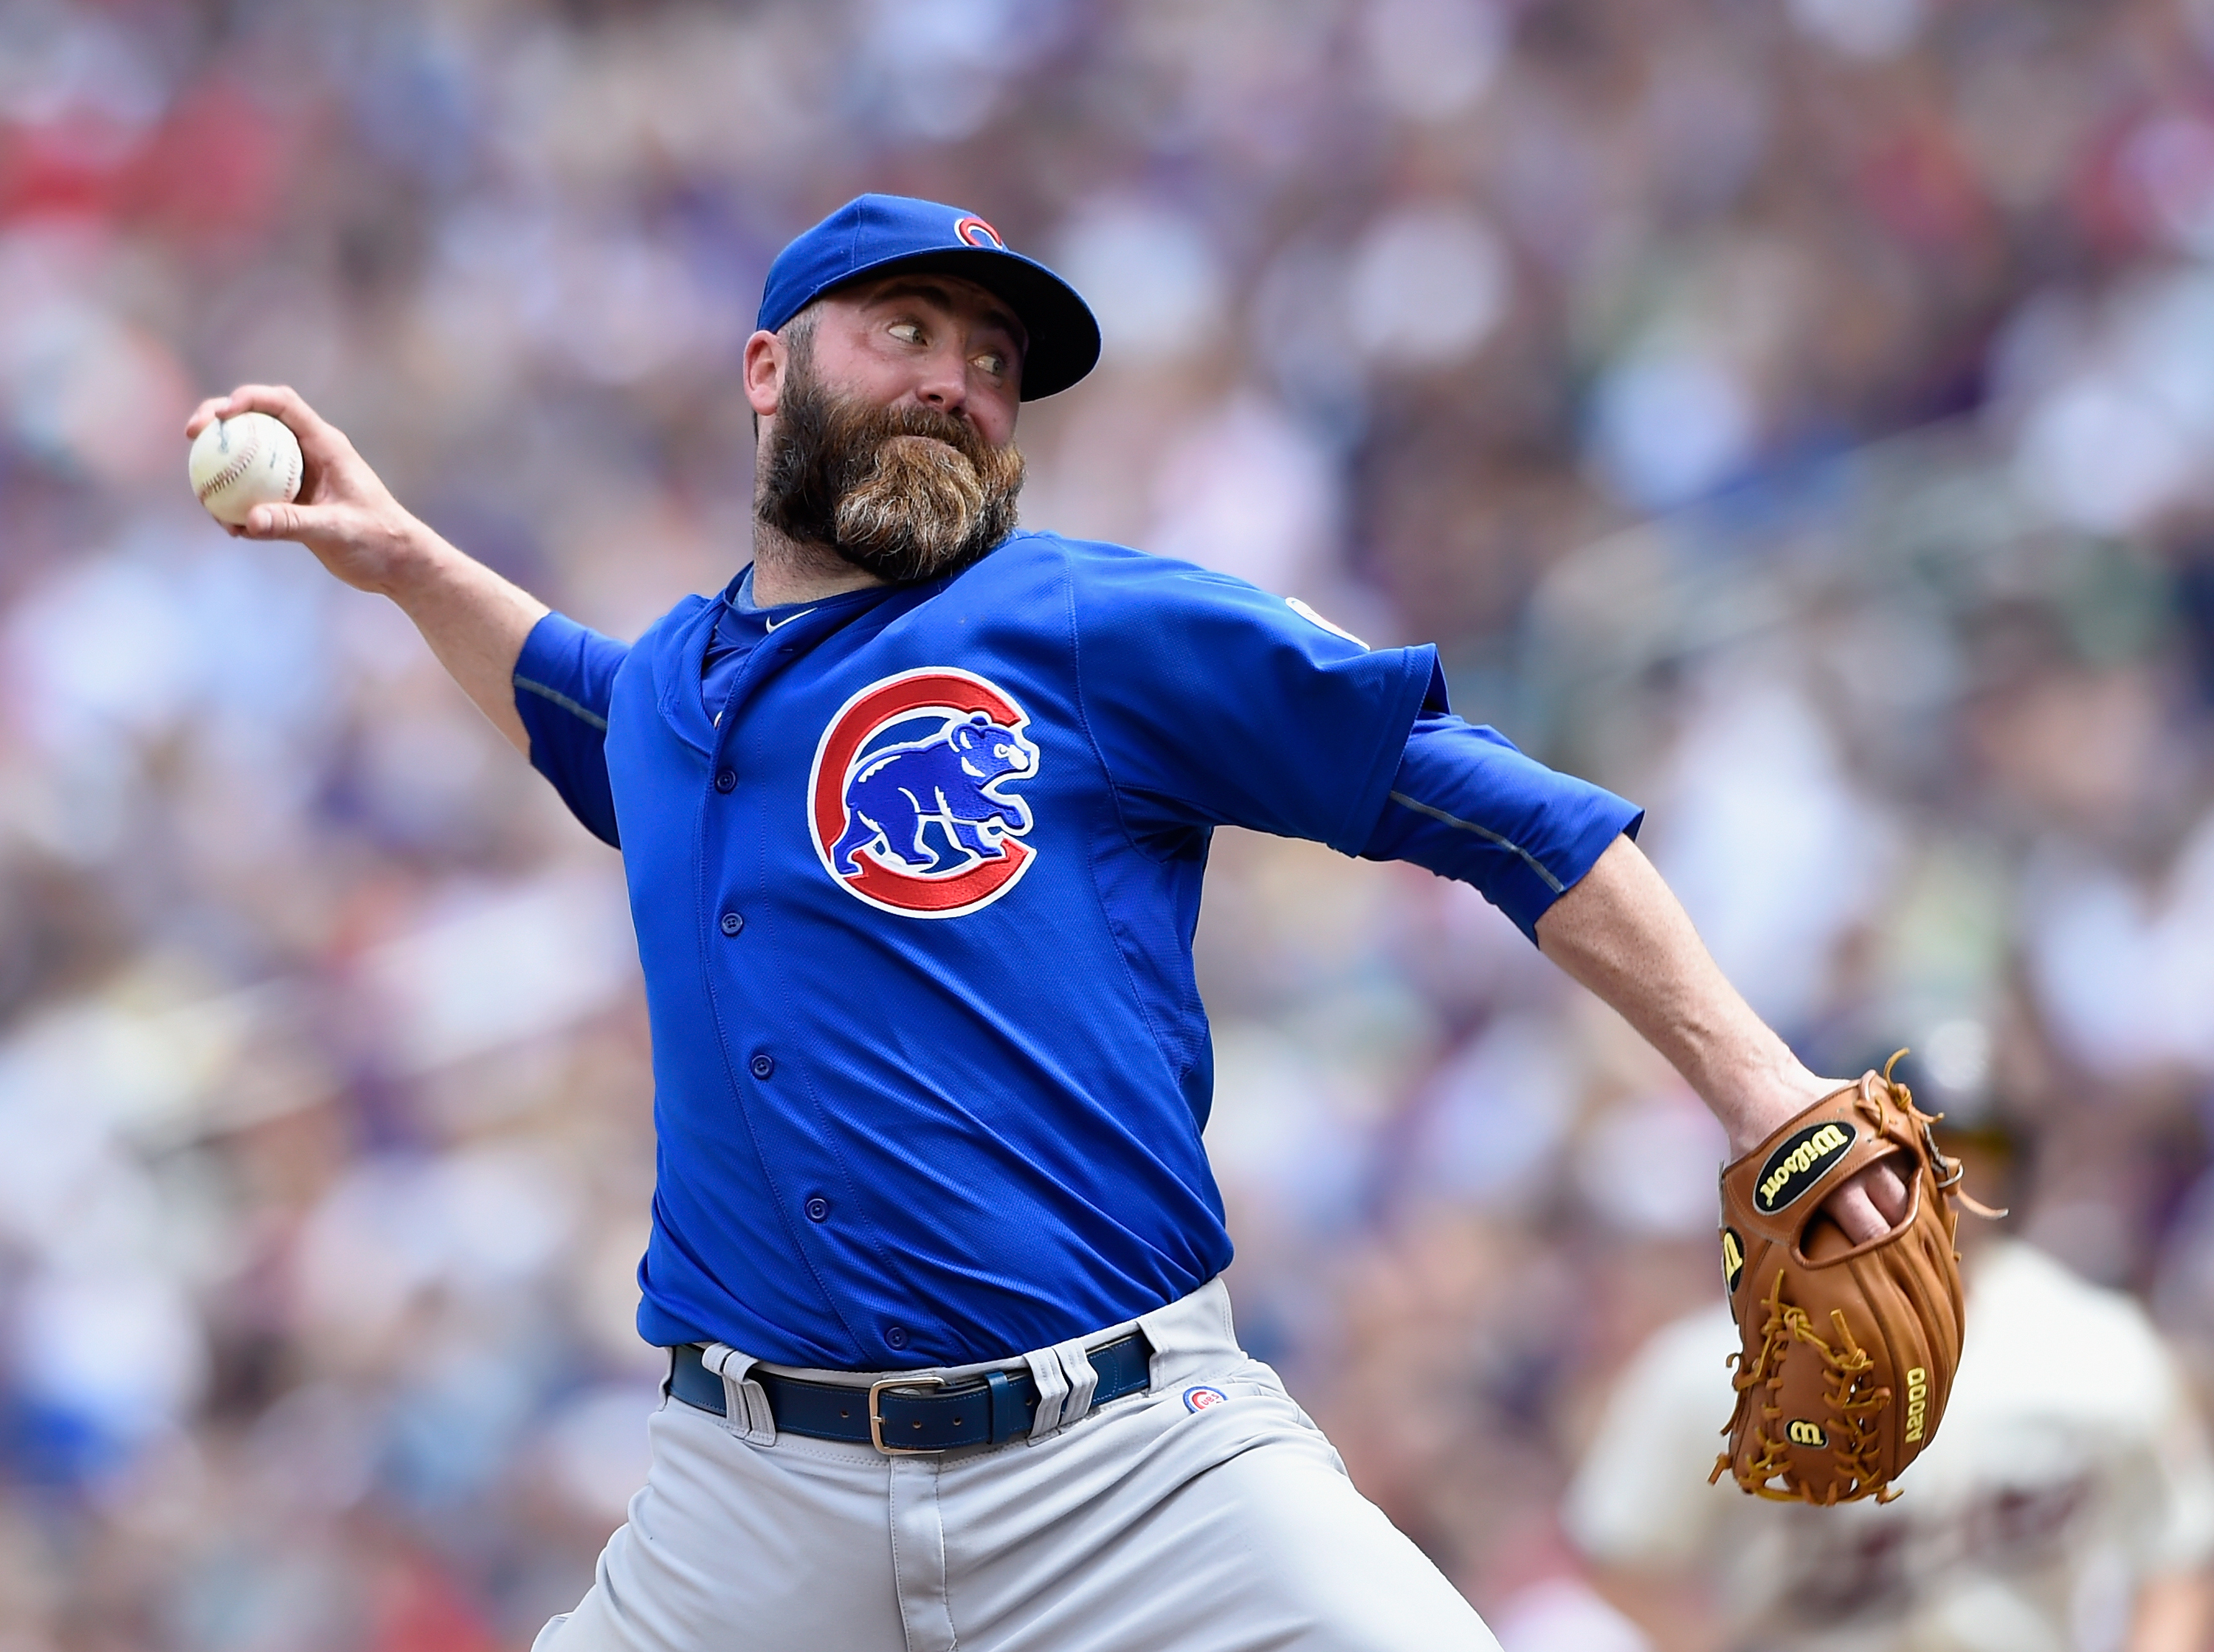 MINNEAPOLIS, MN - JUNE 20: Jason Motte #30 of the Chicago Cubs delivers a pitch against the Minnesota Twins during the ninth inning of the game on June 20, 2015 at Target Field in Minneapolis, Minnesota. The Cubs defeated the Twins 4-1 in ten innings. (Credit: Hannah Foslien/Getty Images)